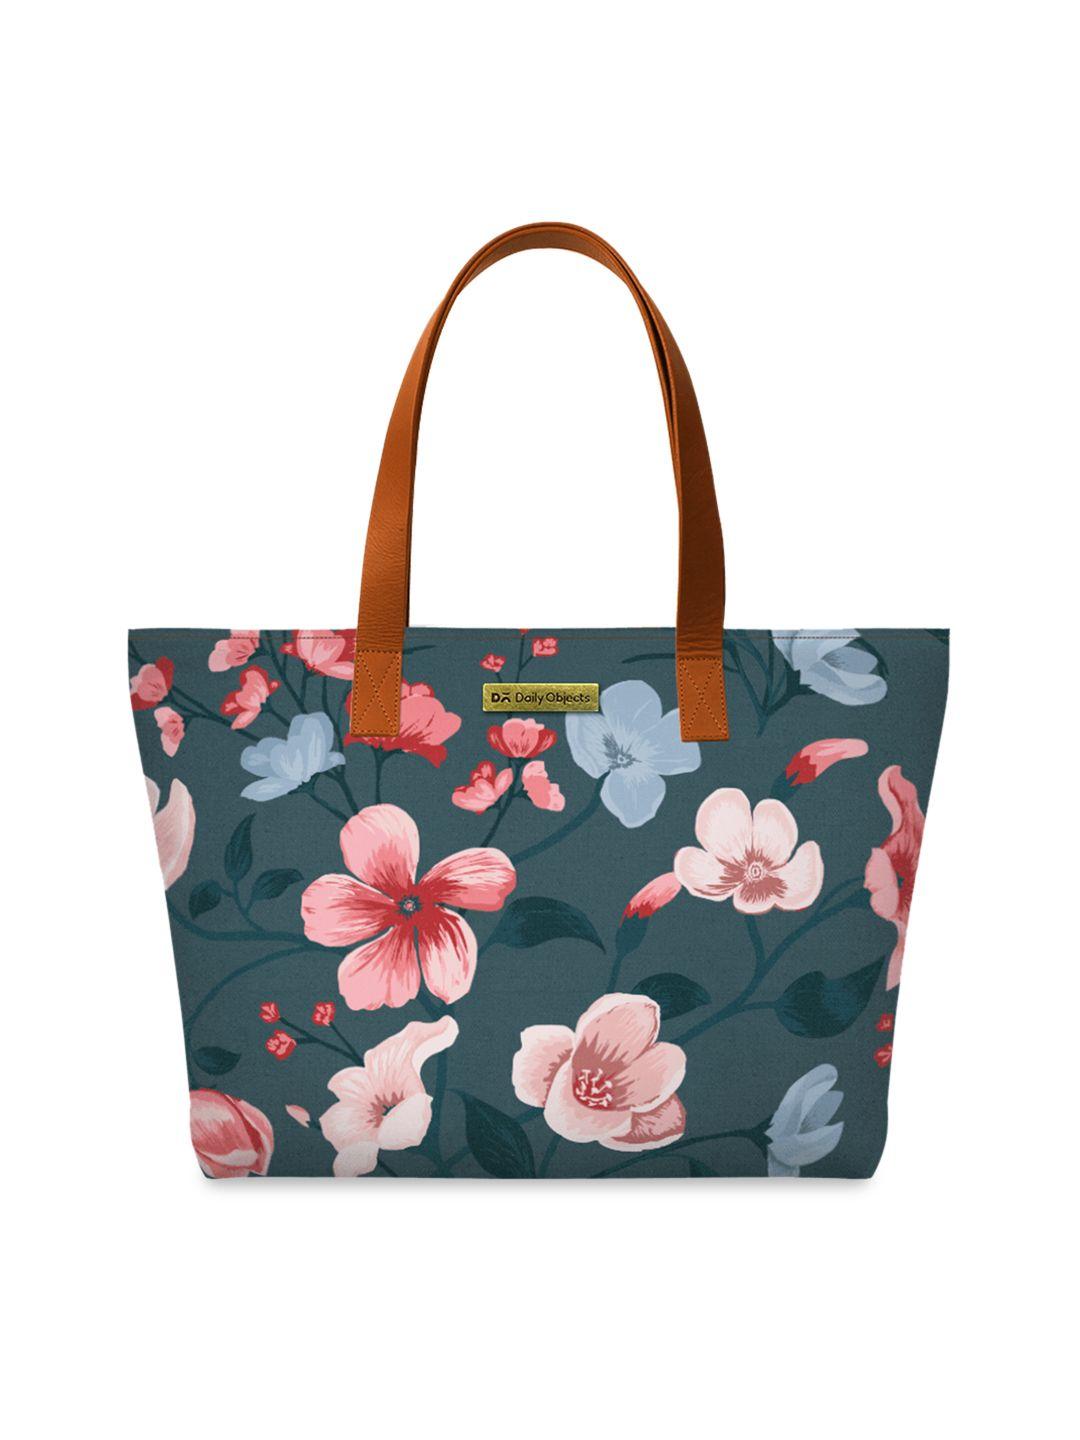 dailyobjects teal green & pink floral printed tote bag